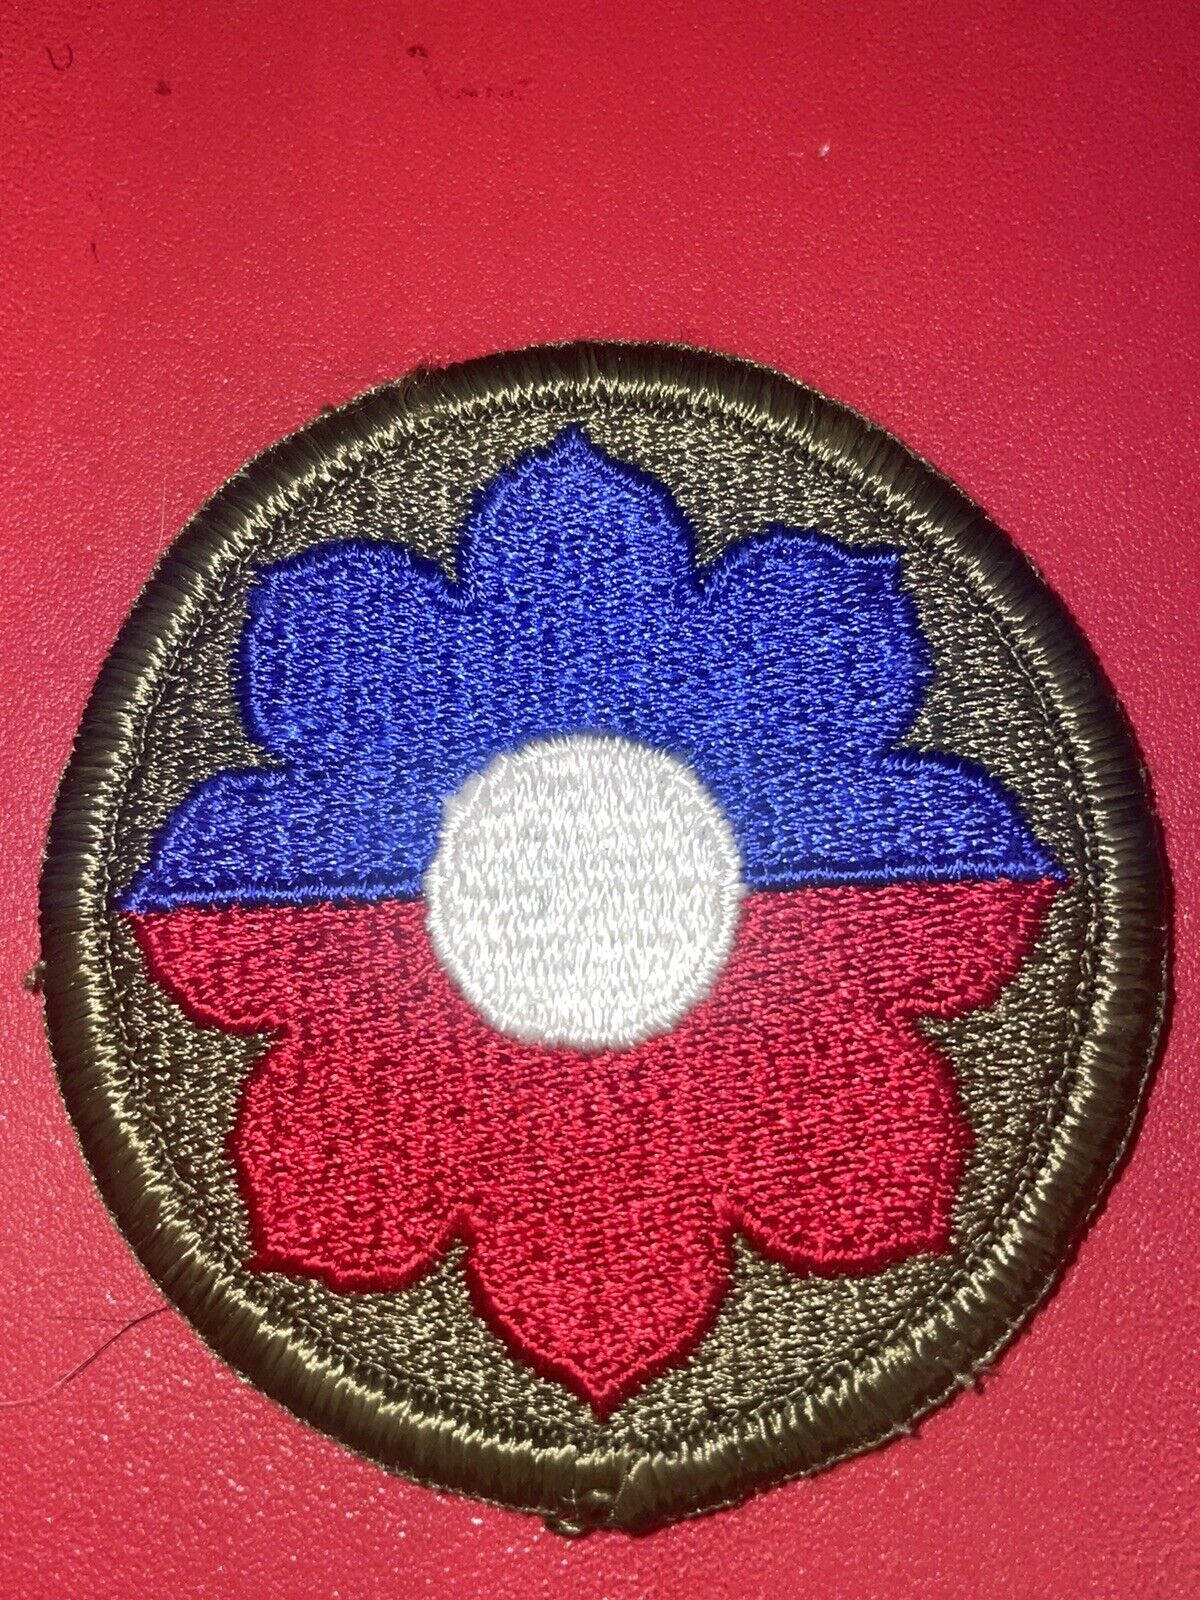 1970s-Modern Day 9th Infantry Division Patch(X)